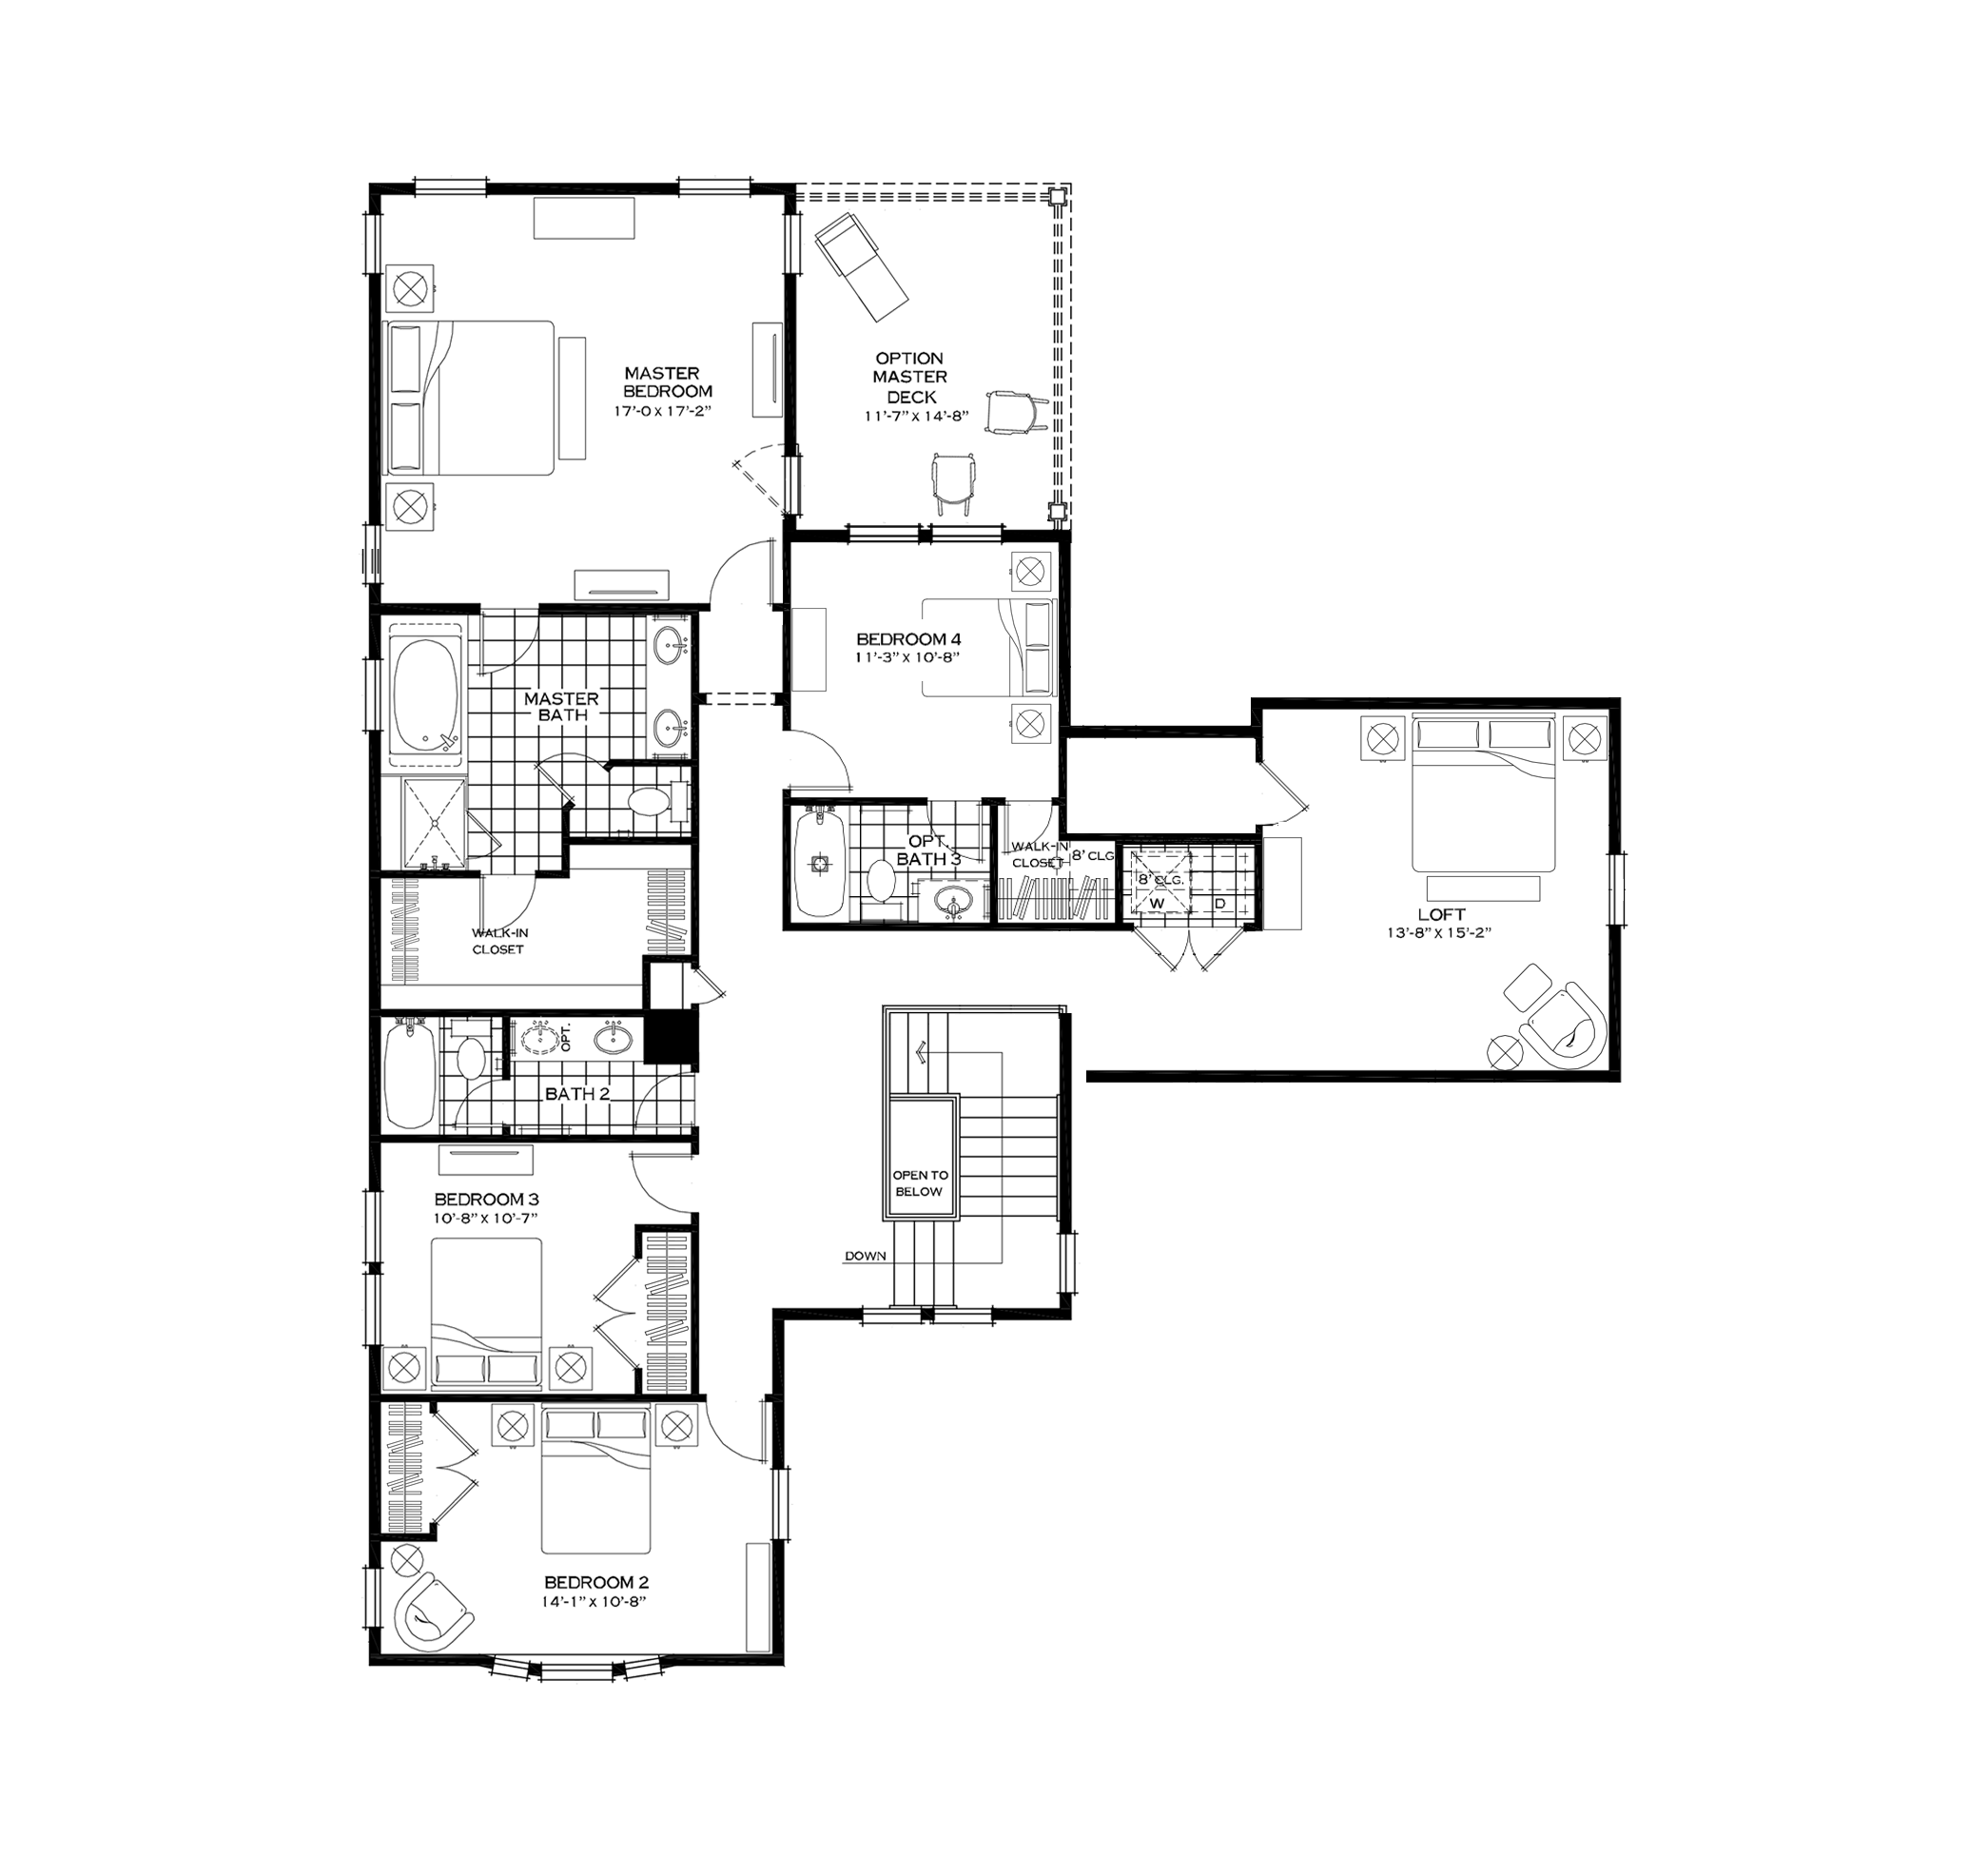 Second Floor with Fourth Bedroom and Large Loft over Garage Option